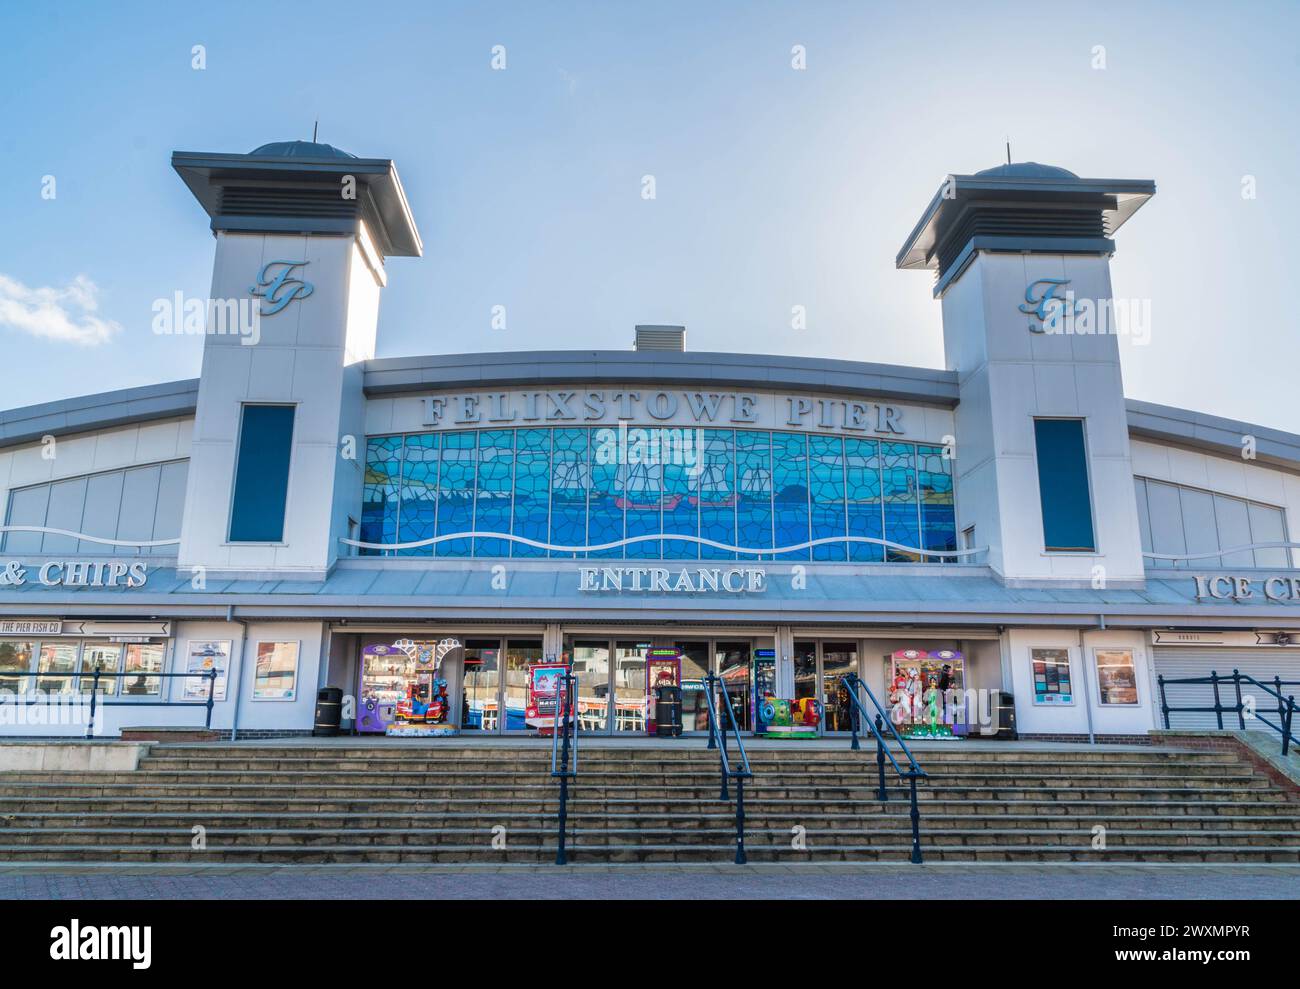 Felixstowe pier originally constructed in 1905, after a major rebuild this new Pier opened in August of 2017.  Suffolk UK. February 2024 Stock Photo